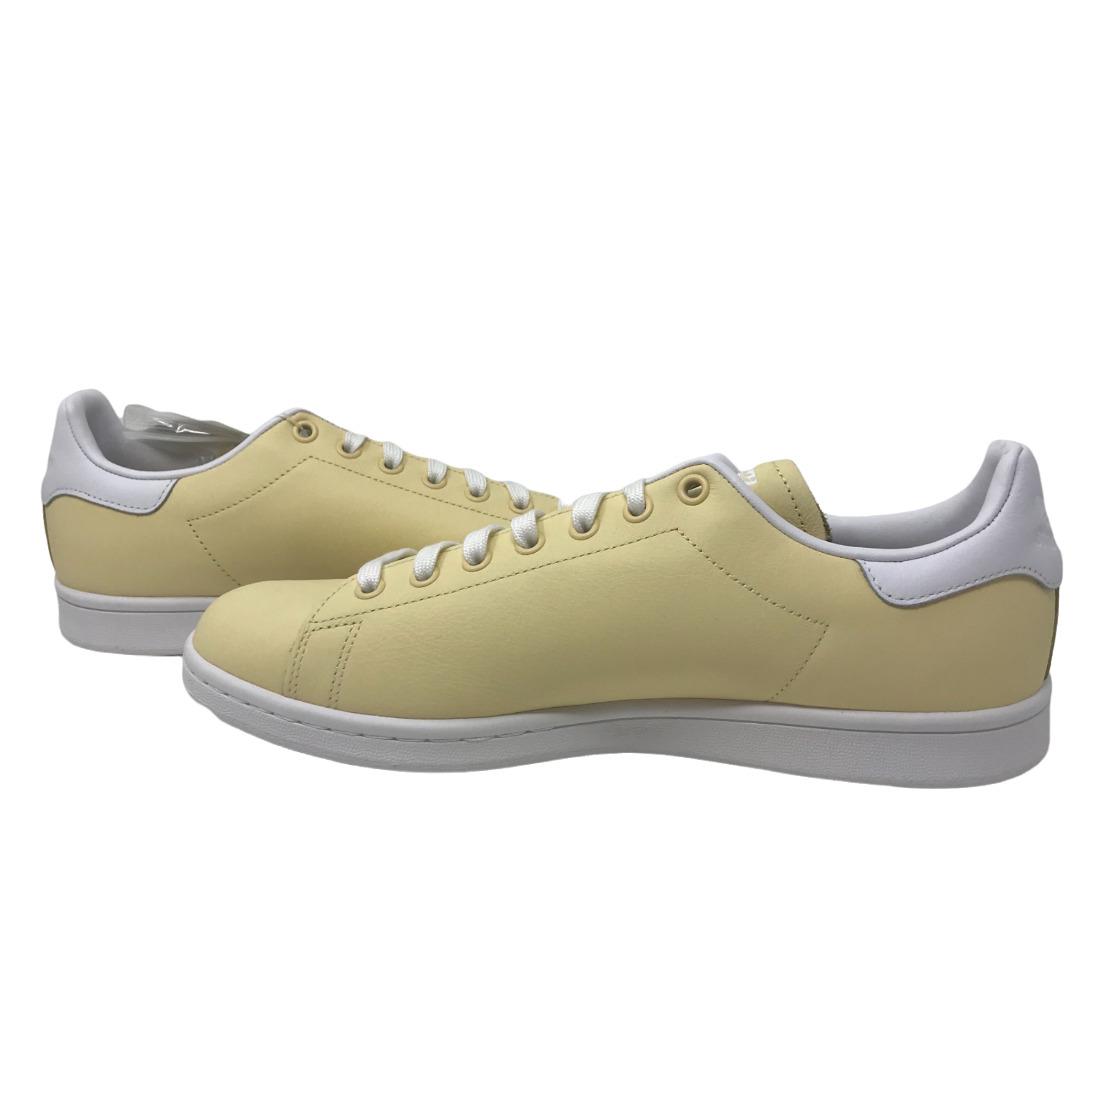 Adidas Men`s Stan Smith Lace Up Sneakers Size 10M - Yellow